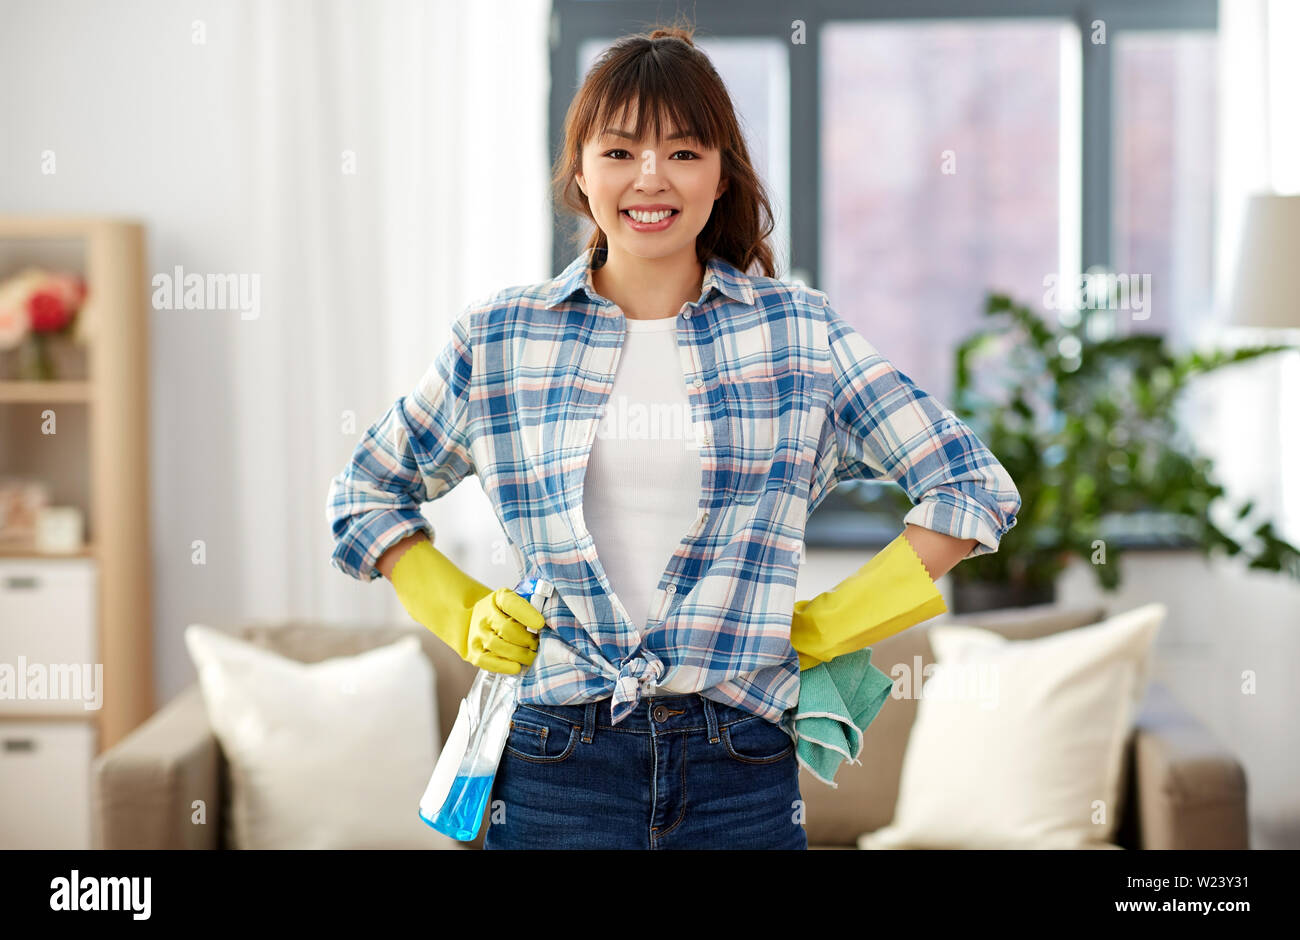 smiling asian woman cleaning at home Stock Photo